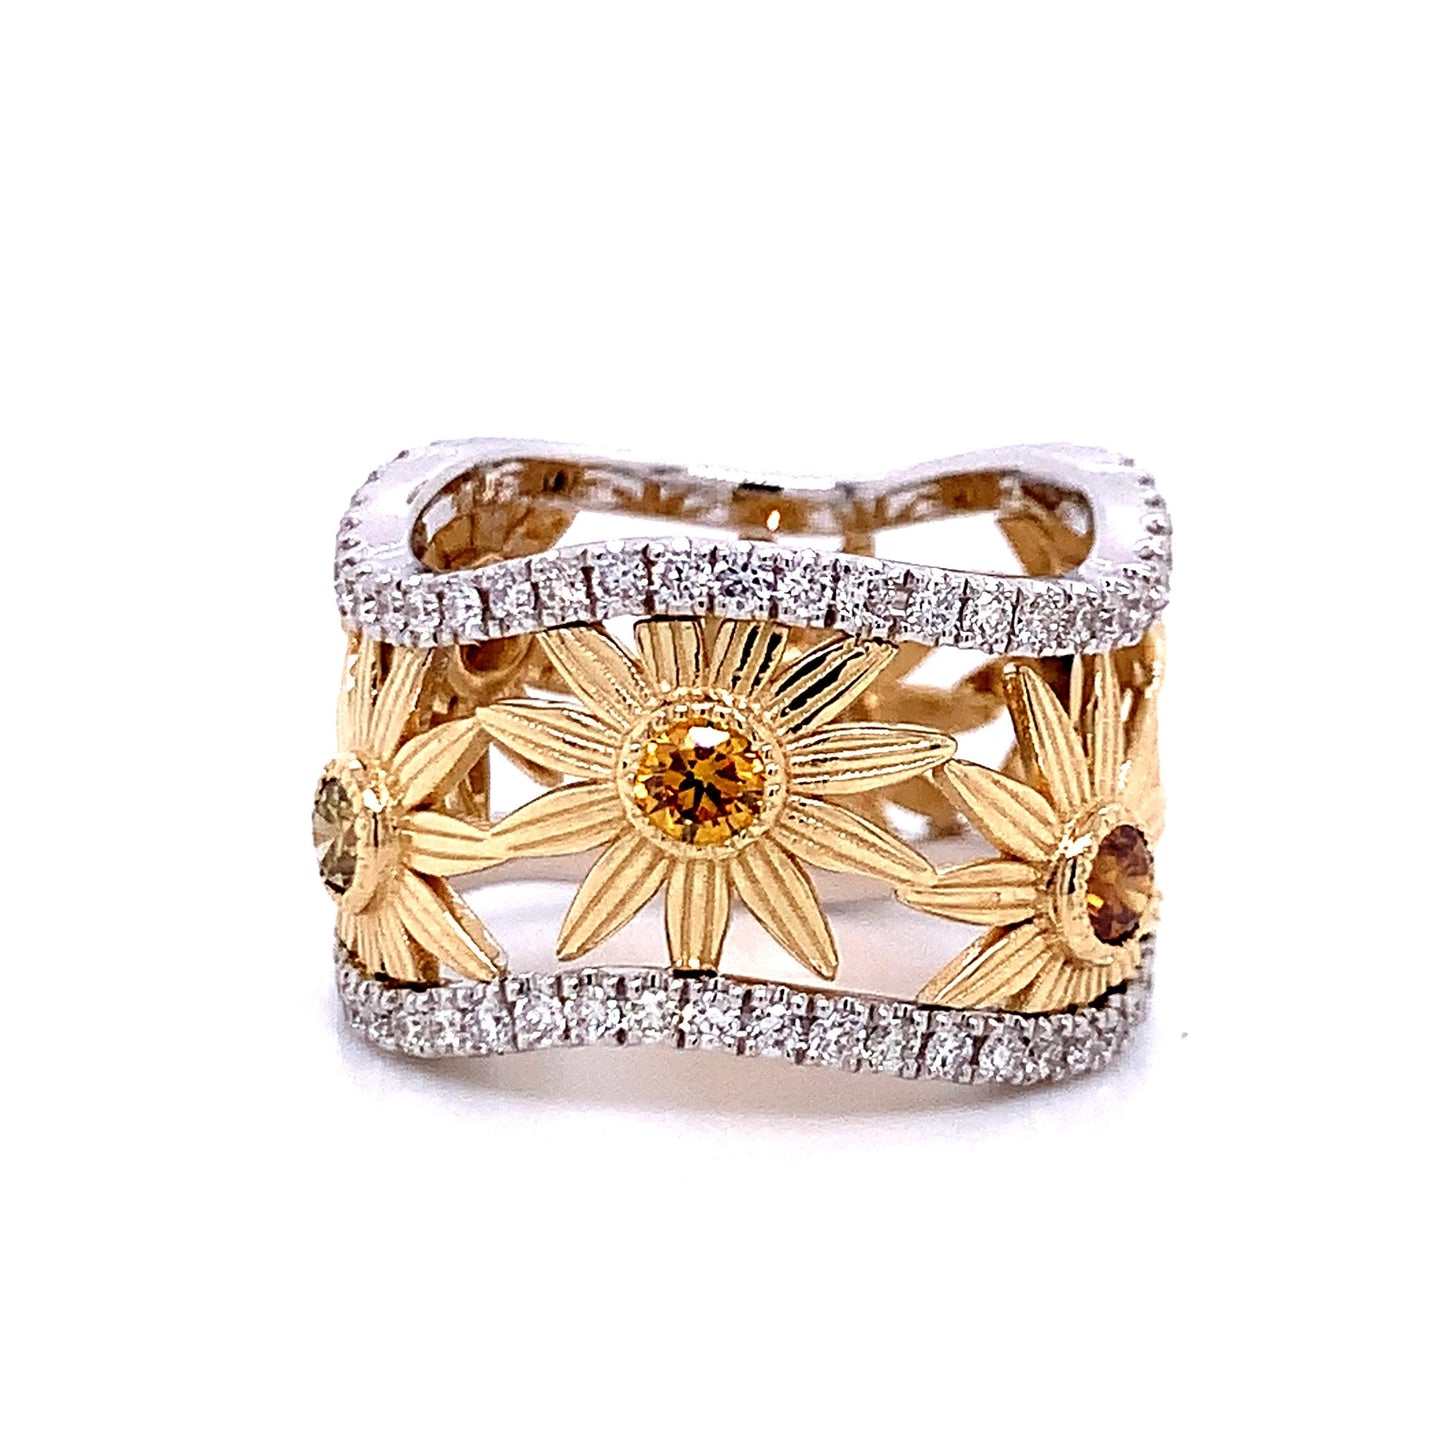 Wavy Fancy Diamond Cocktail Ring in 14K Two-Tone Gold